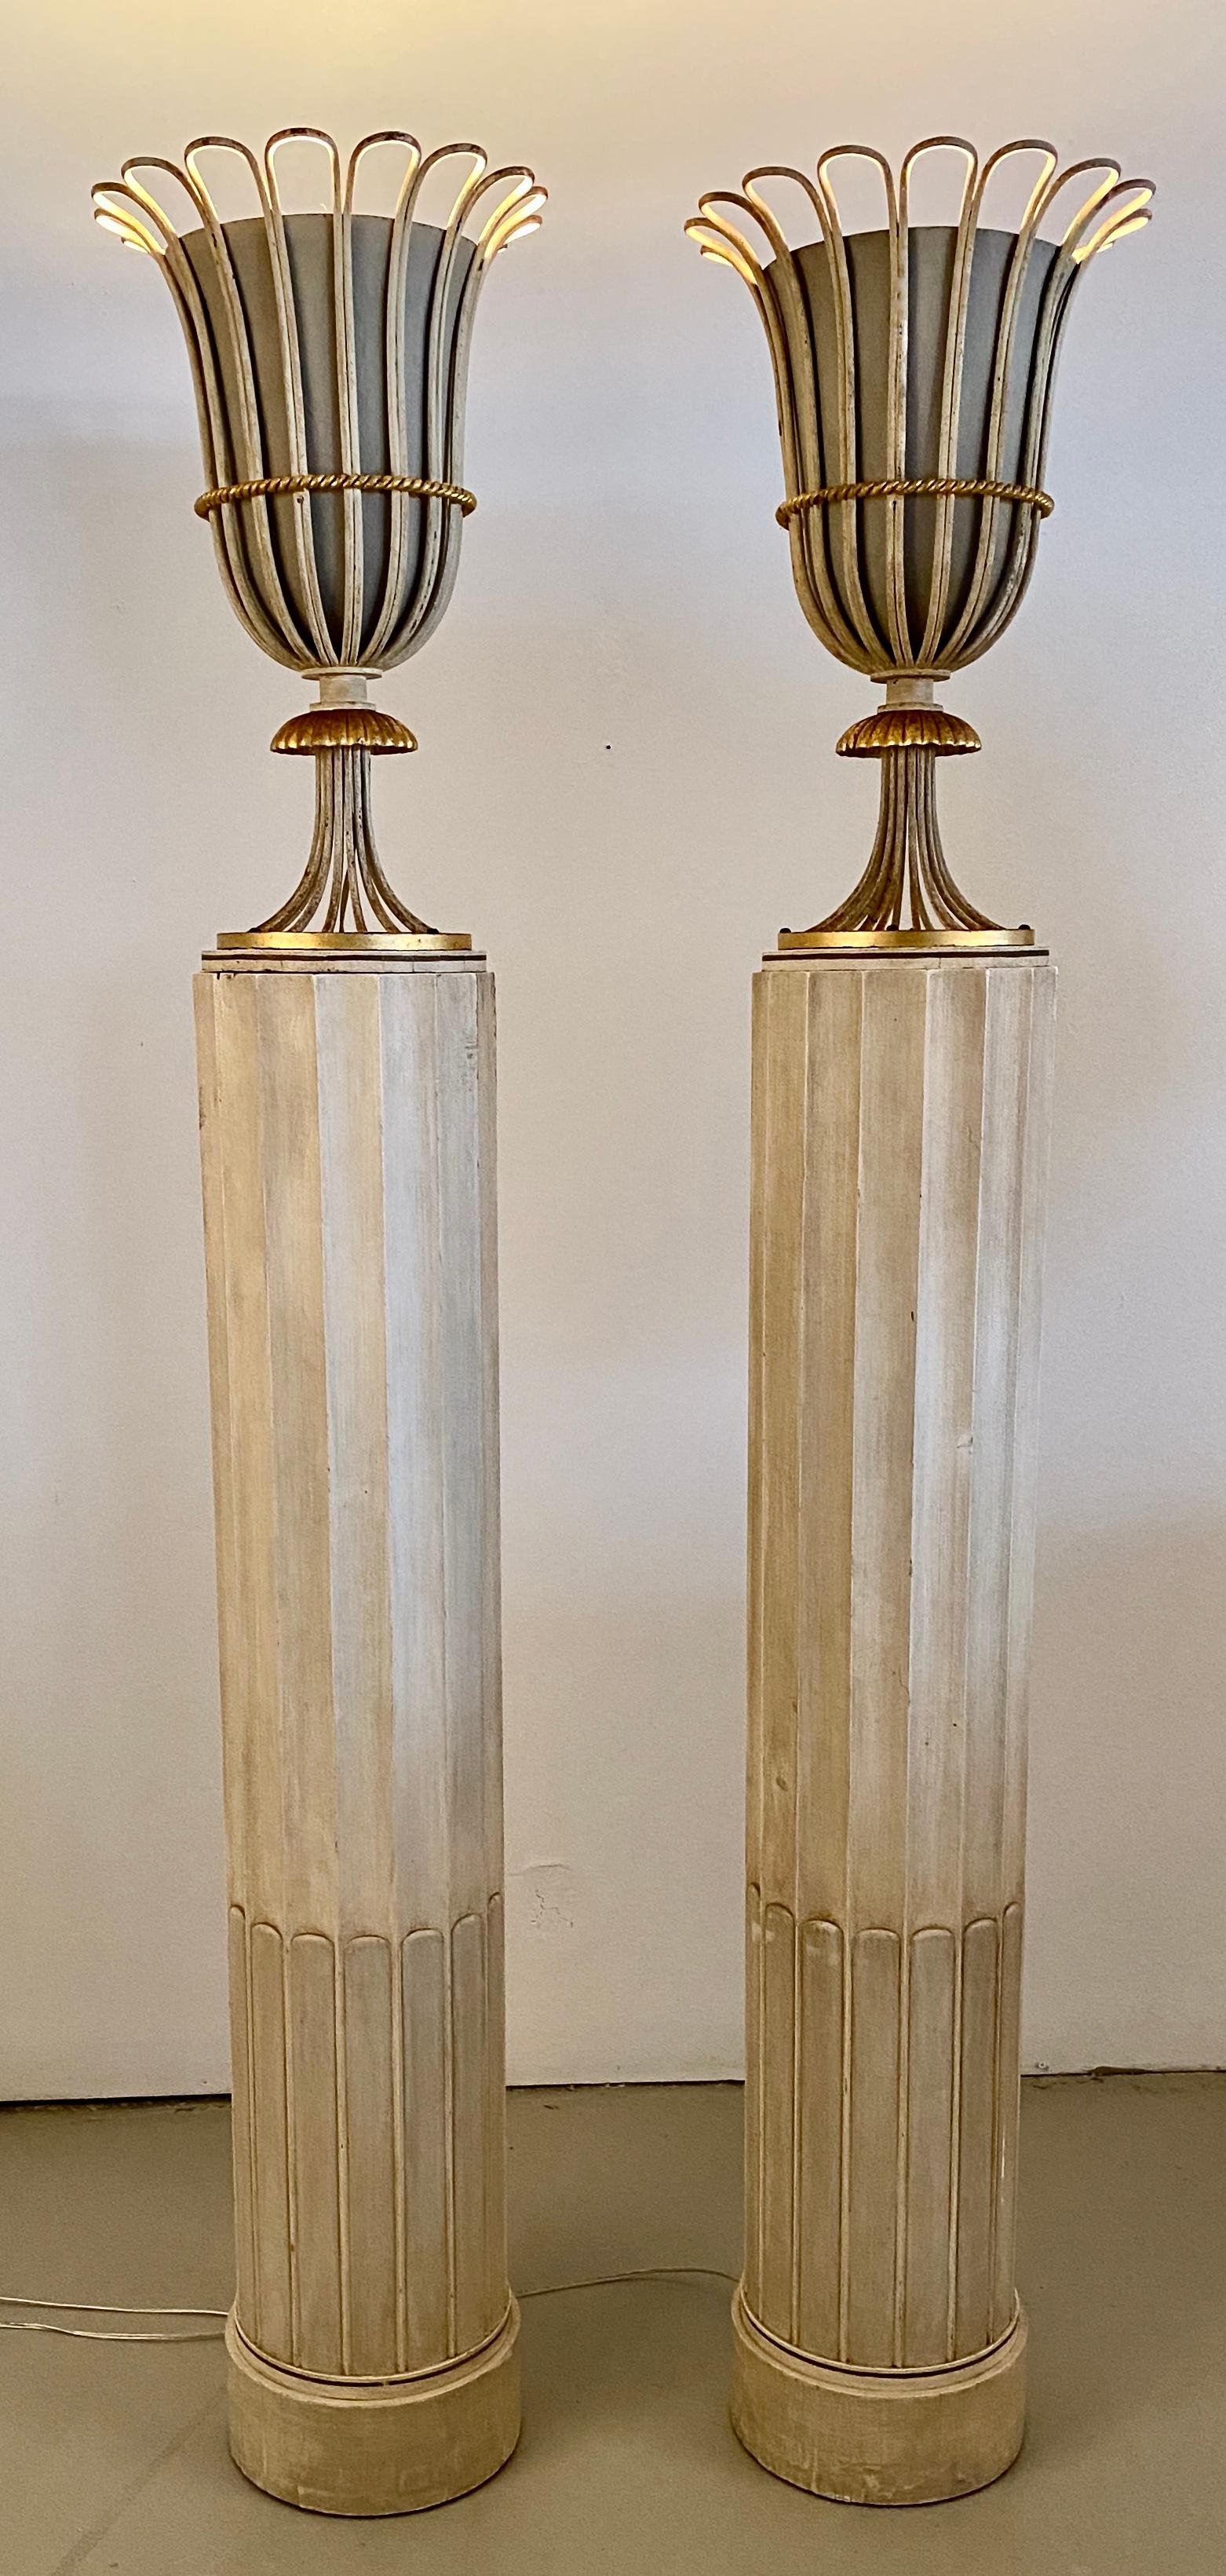 Totally glam pair of column-form torchieres made by Grosfeld House in true Hollywood Regency style. The fluted column bases are wood, the urn shaped lighting fixtures are metal with hand gilded details. The lights have been newly rewired but are